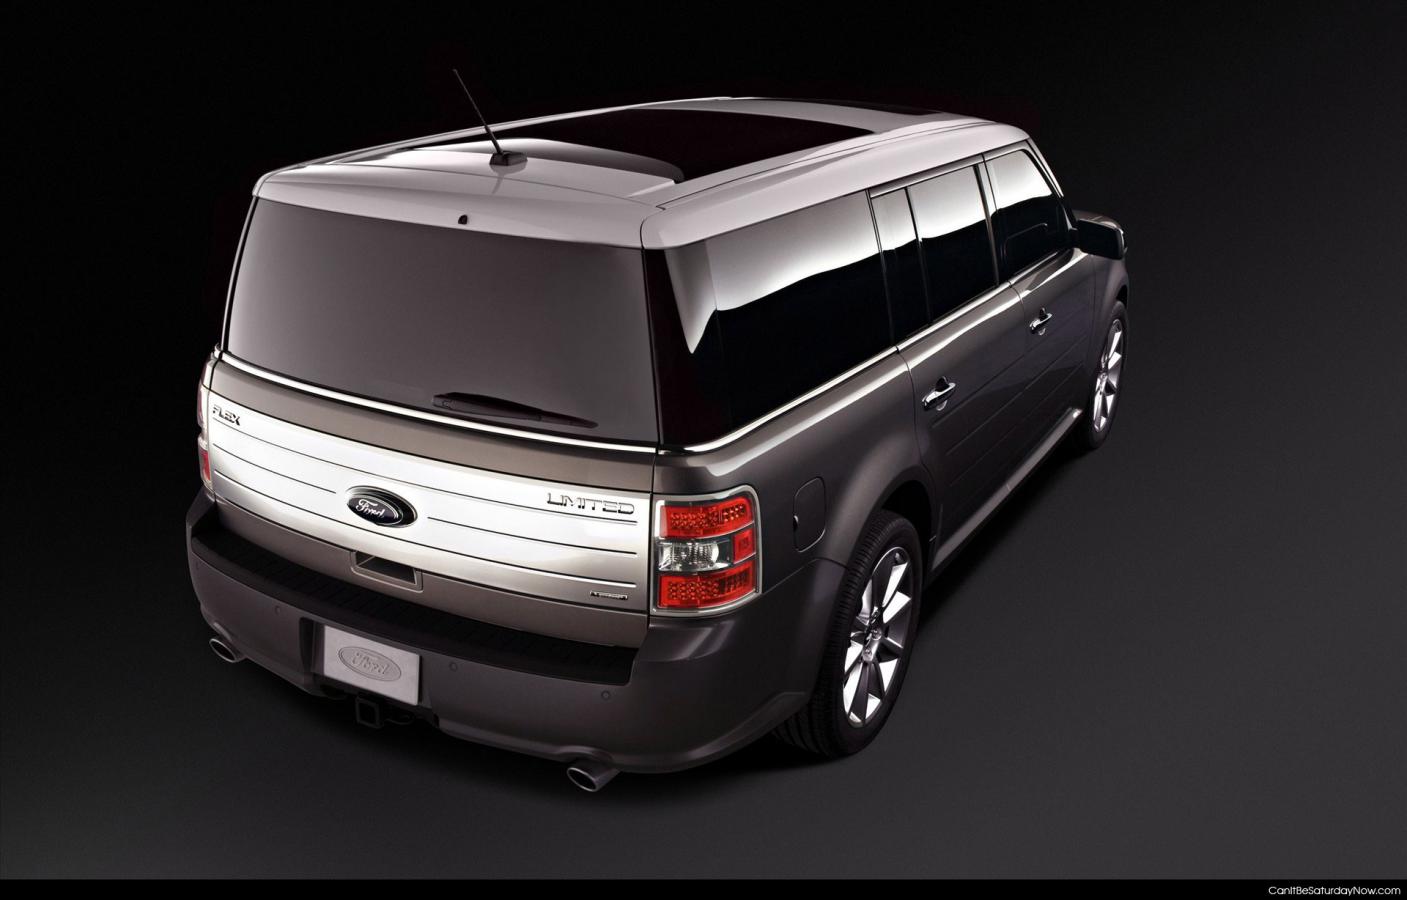 Ford Flex - ugly van if you ask me